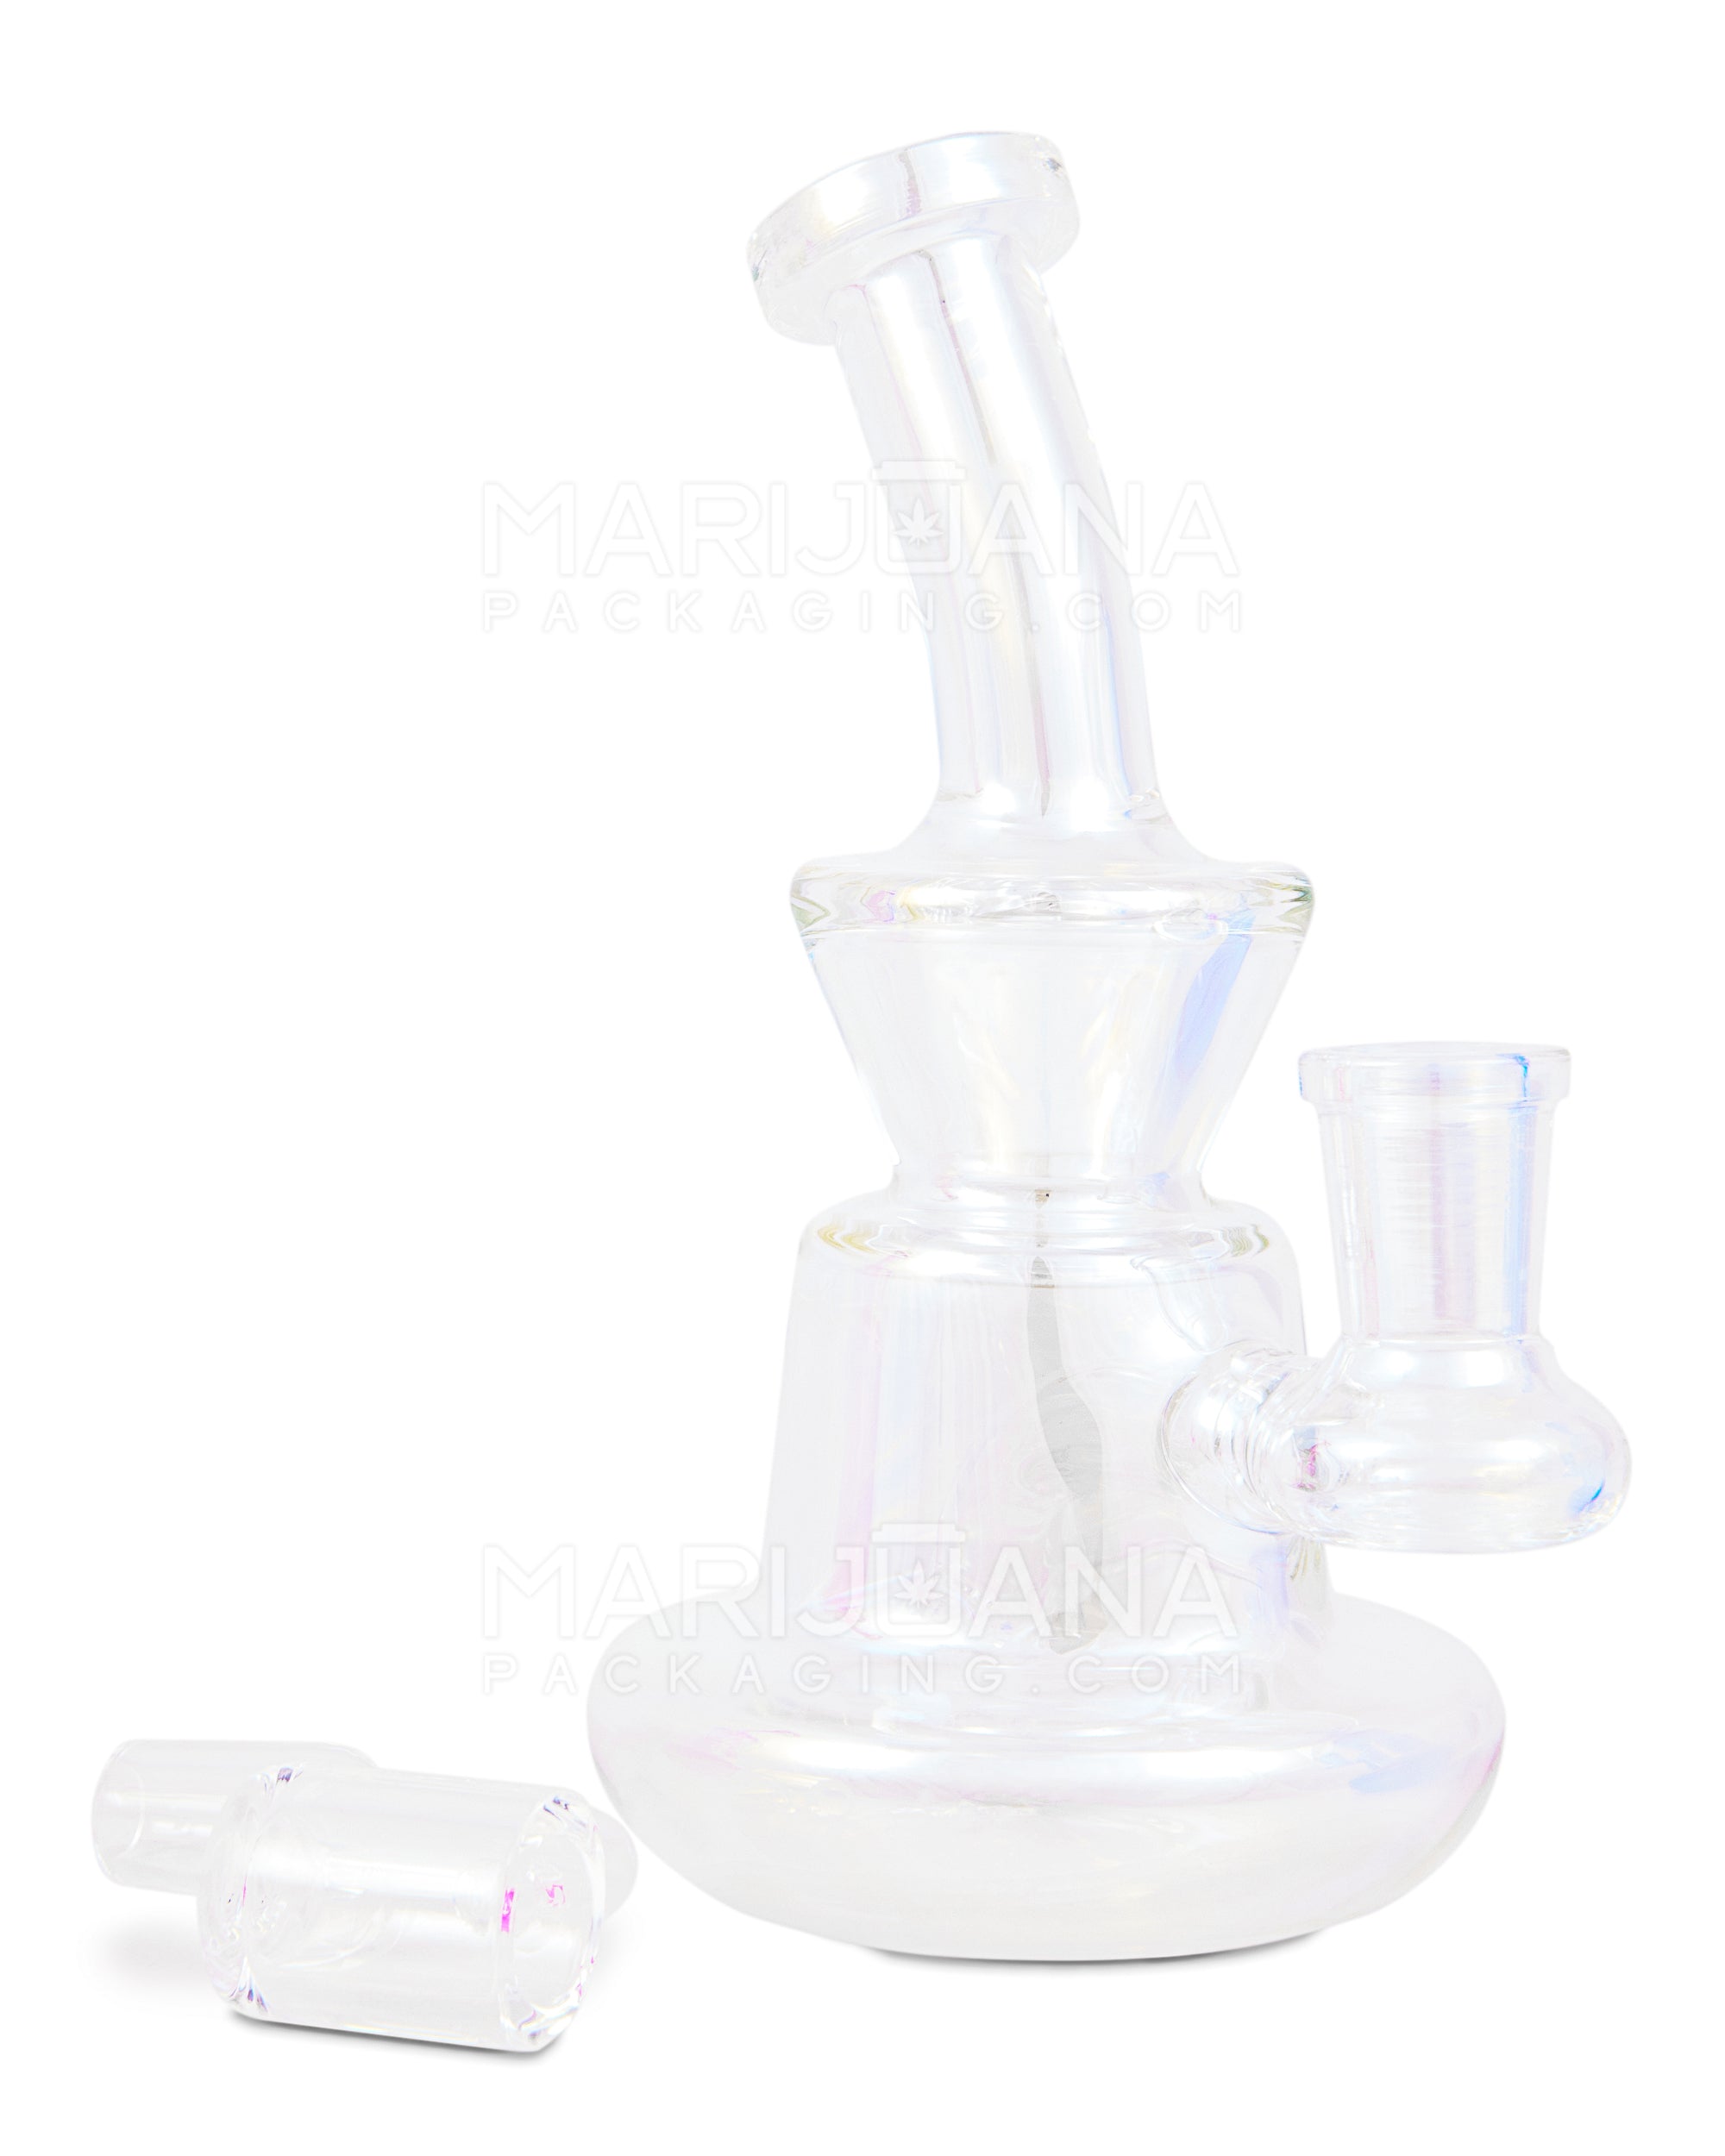 Bent Neck Iridescent Glass Dab Rig w/ Wide Base | 6in Tall - 14mm Banger - Clear - 2